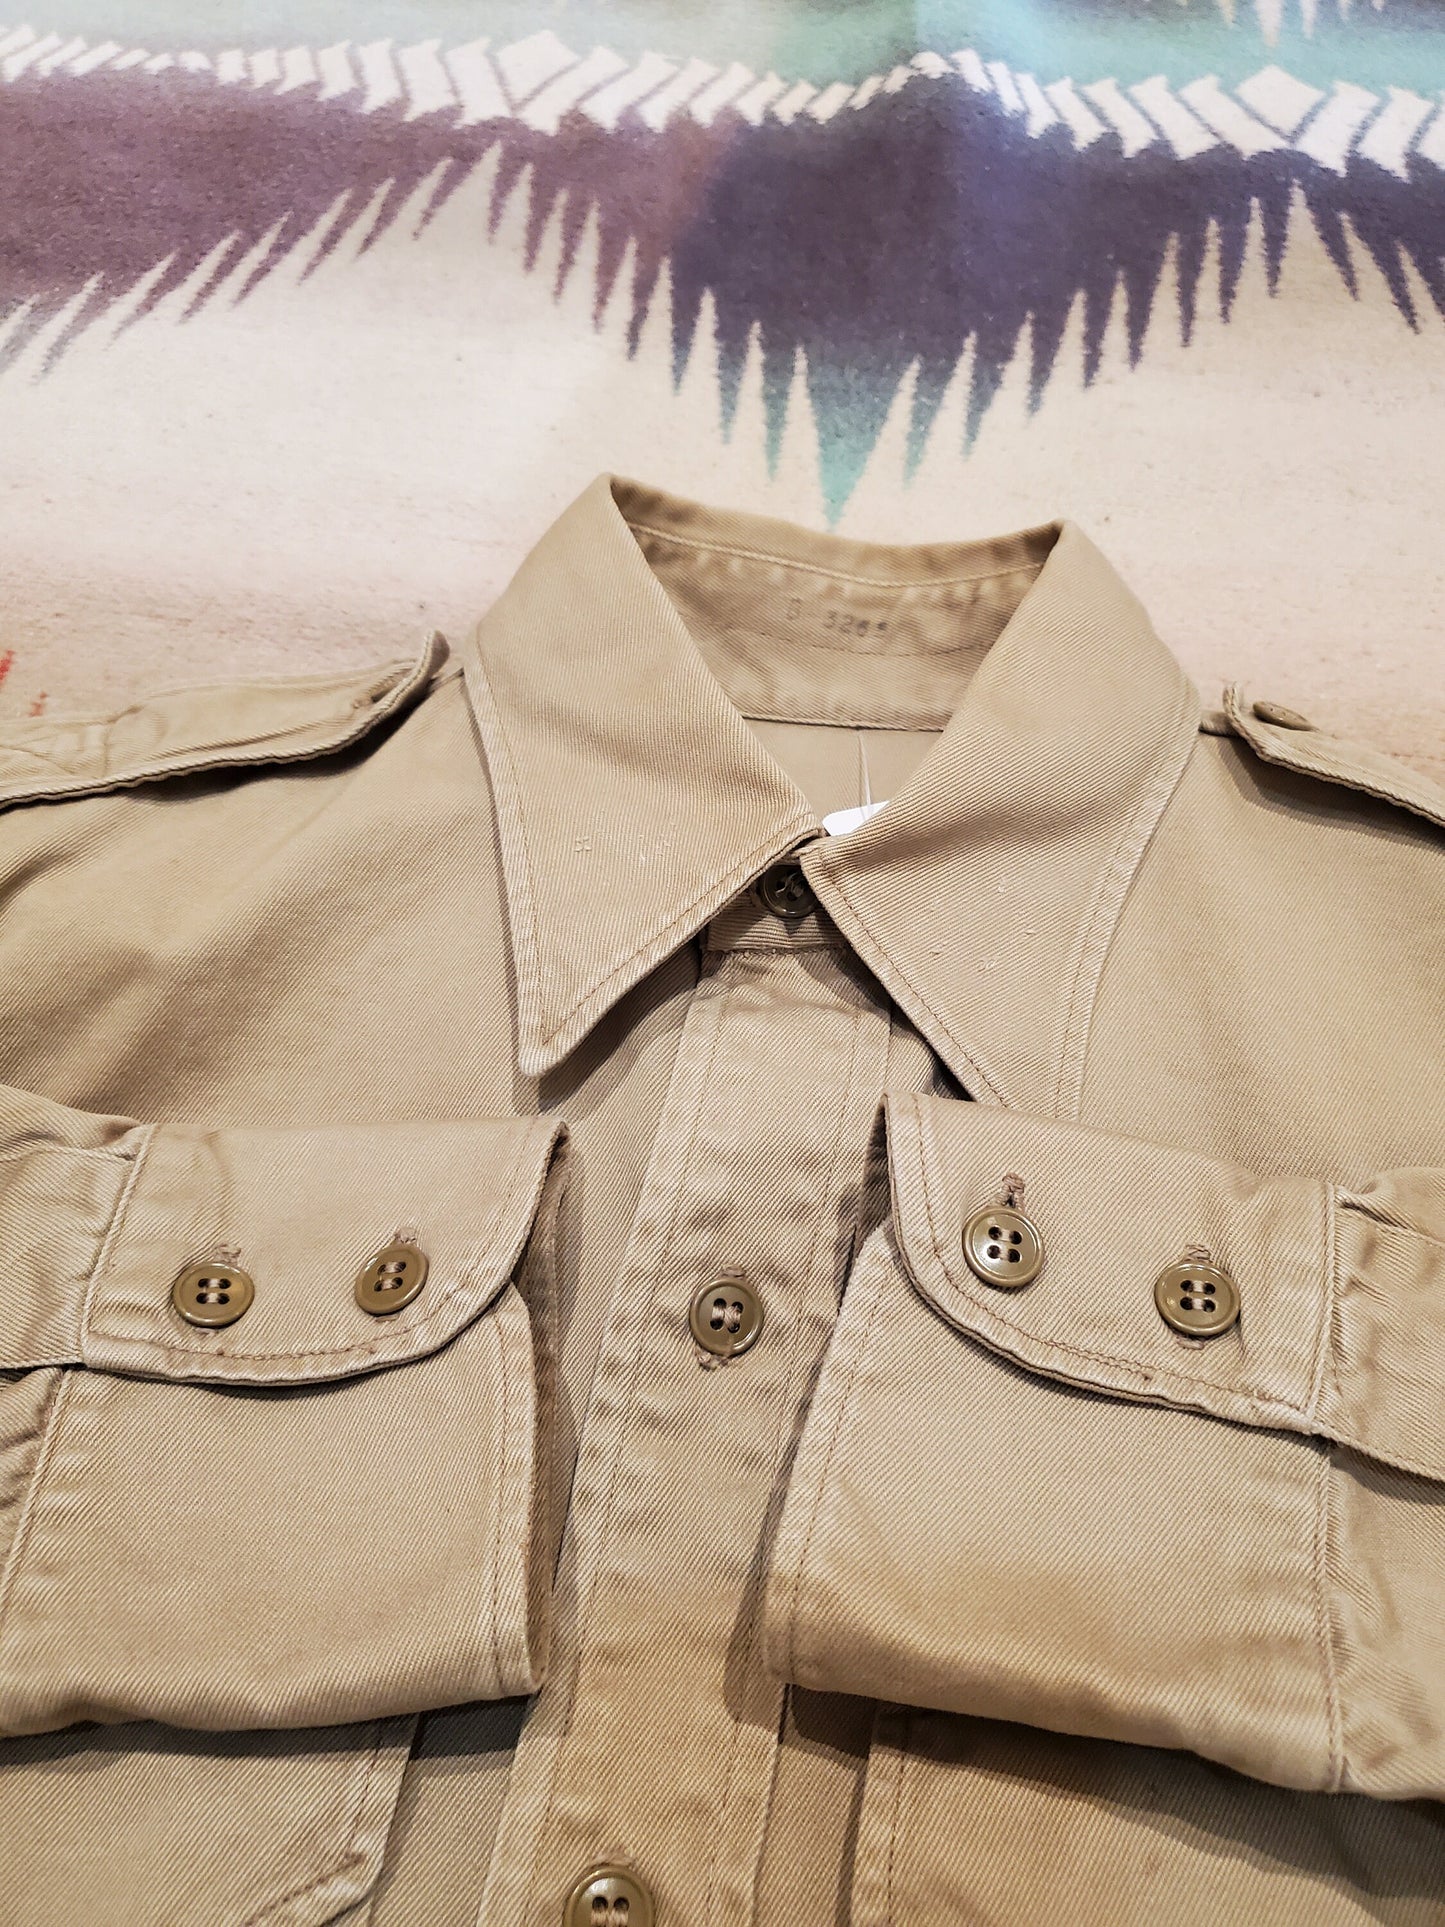 1940s/1950s US Army Officers Shirt Private E-2 Seventh Army Patches Made in USA Size S